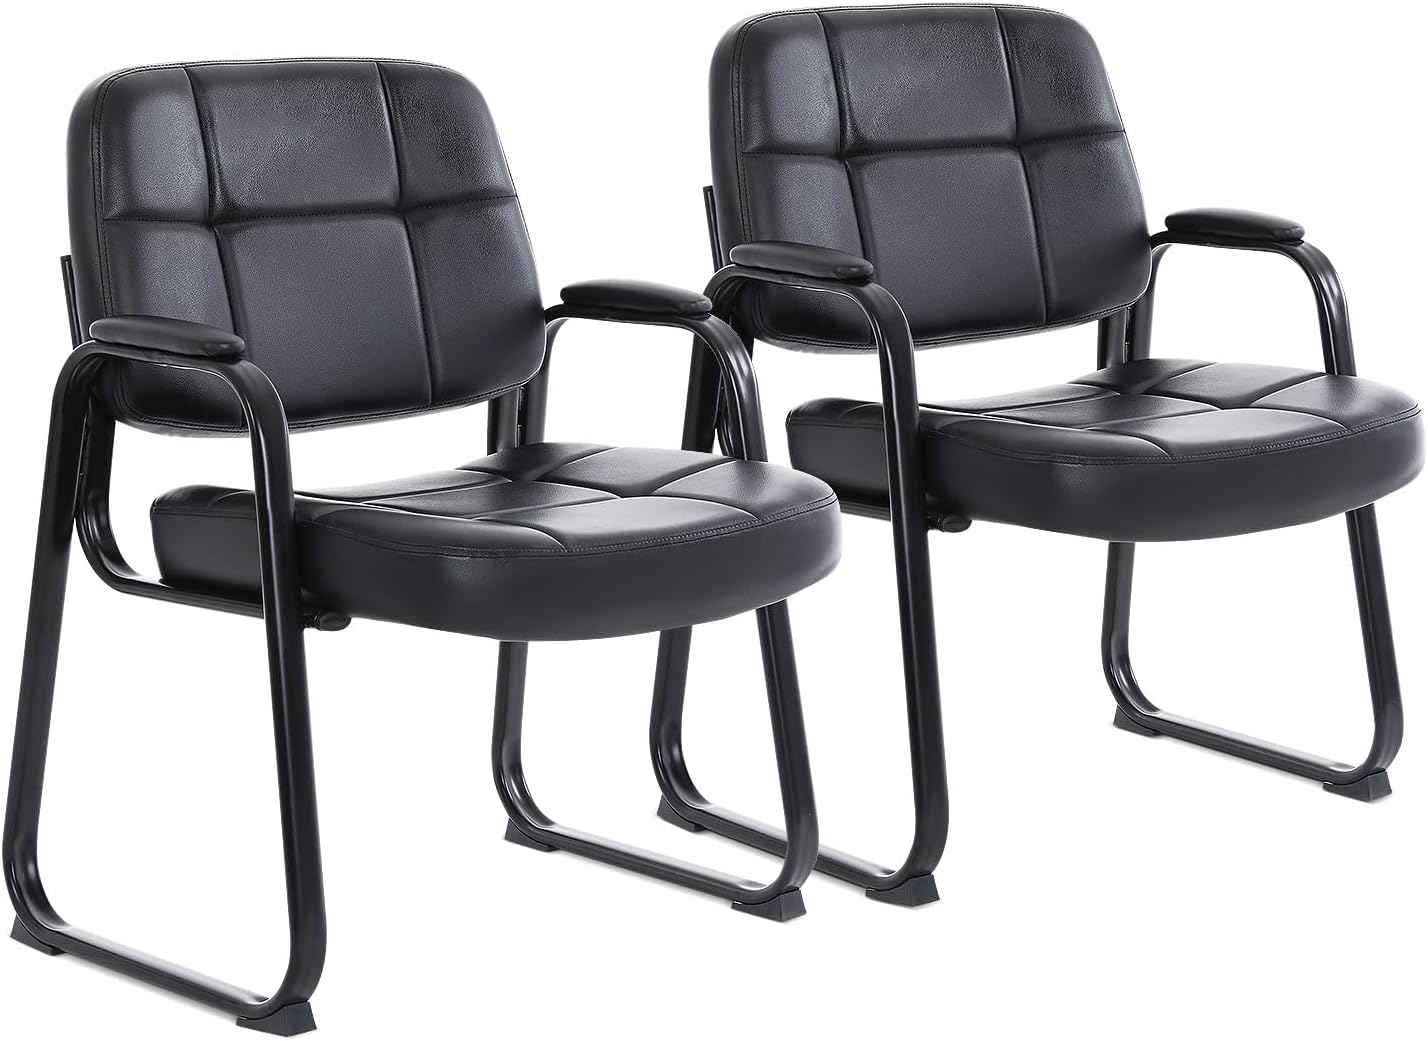 CLATINA Big & Tall Waiting Room Guest Chair with Bonded Leather Padded Arm Rest and Sled Base for Office Reception Lobby and Conference Desk, Black(2 Pack) - image 1 of 7